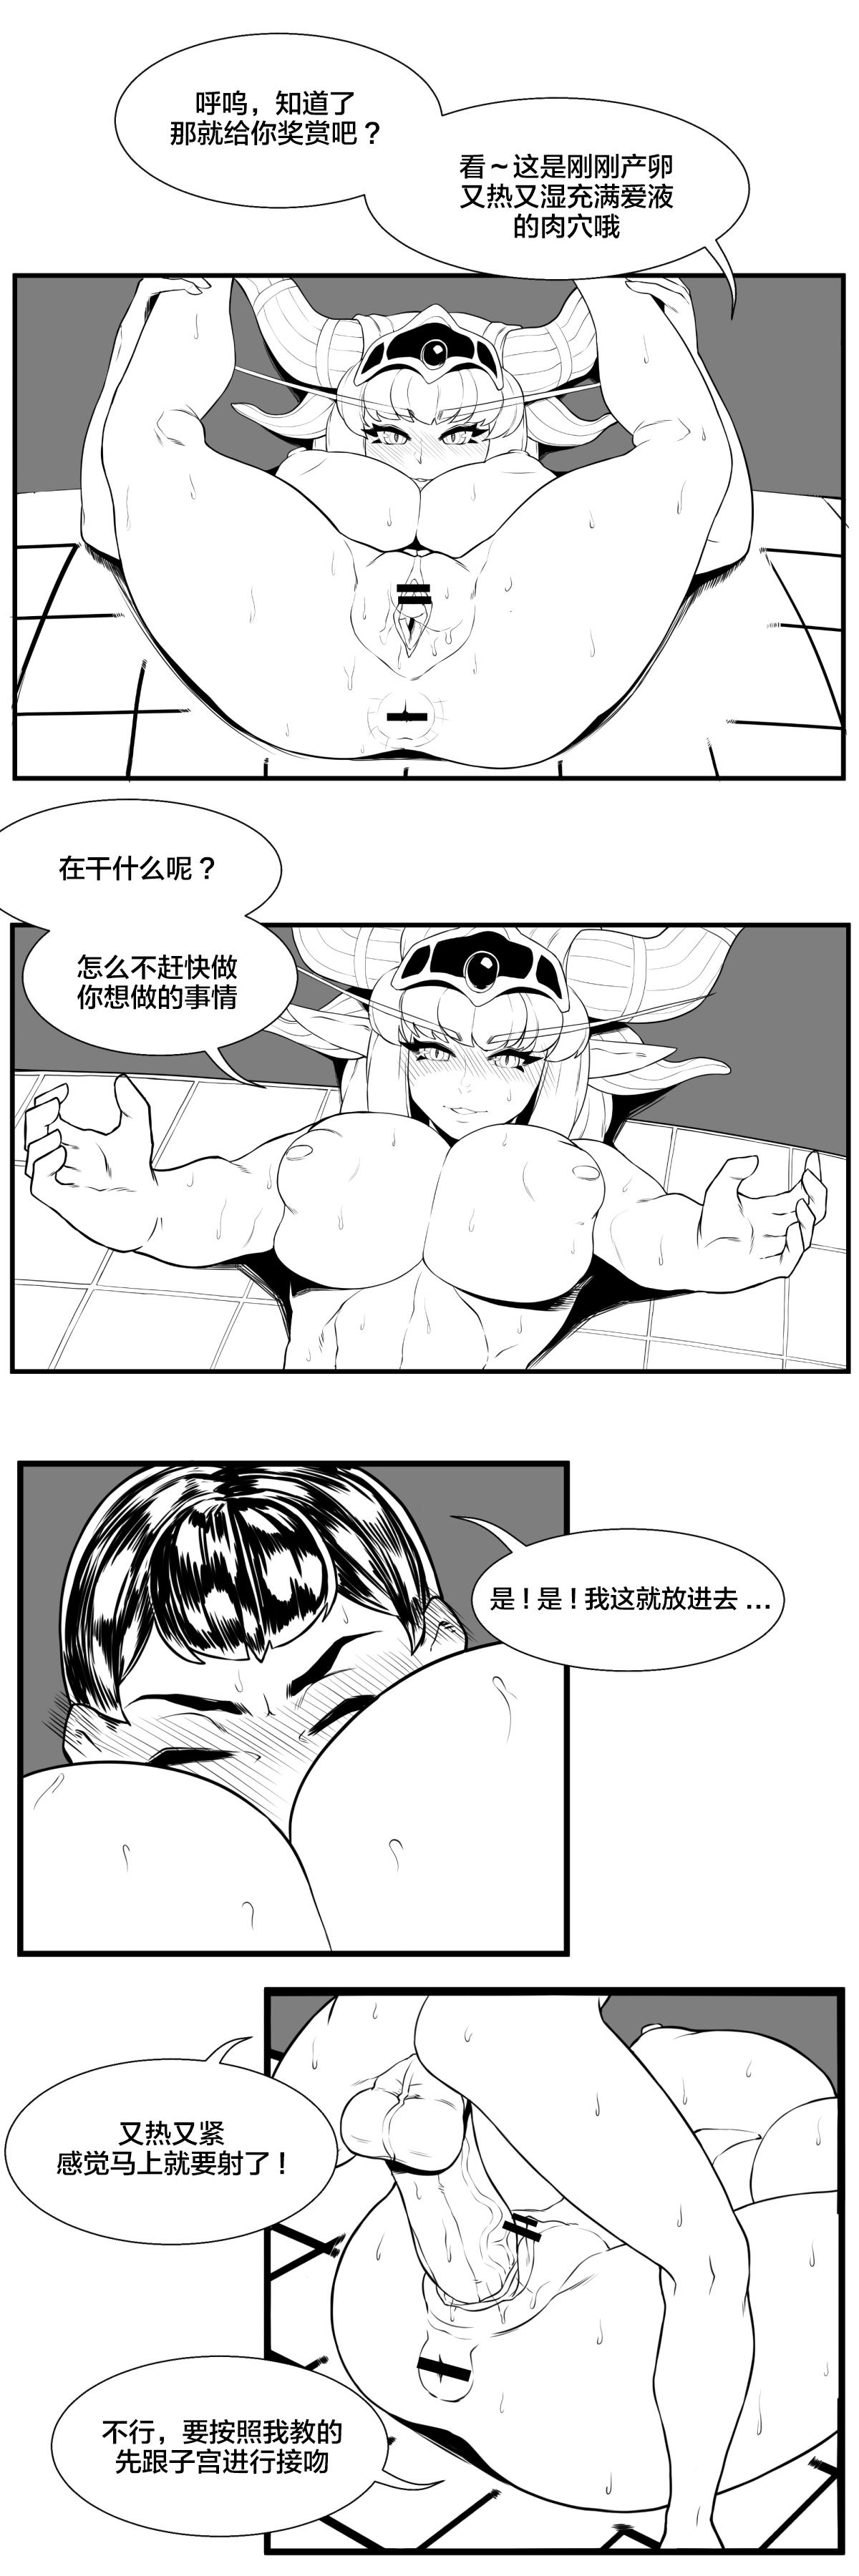 Spread 용엄마와 비밀상담 - World of warcraft Gostoso - Page 6